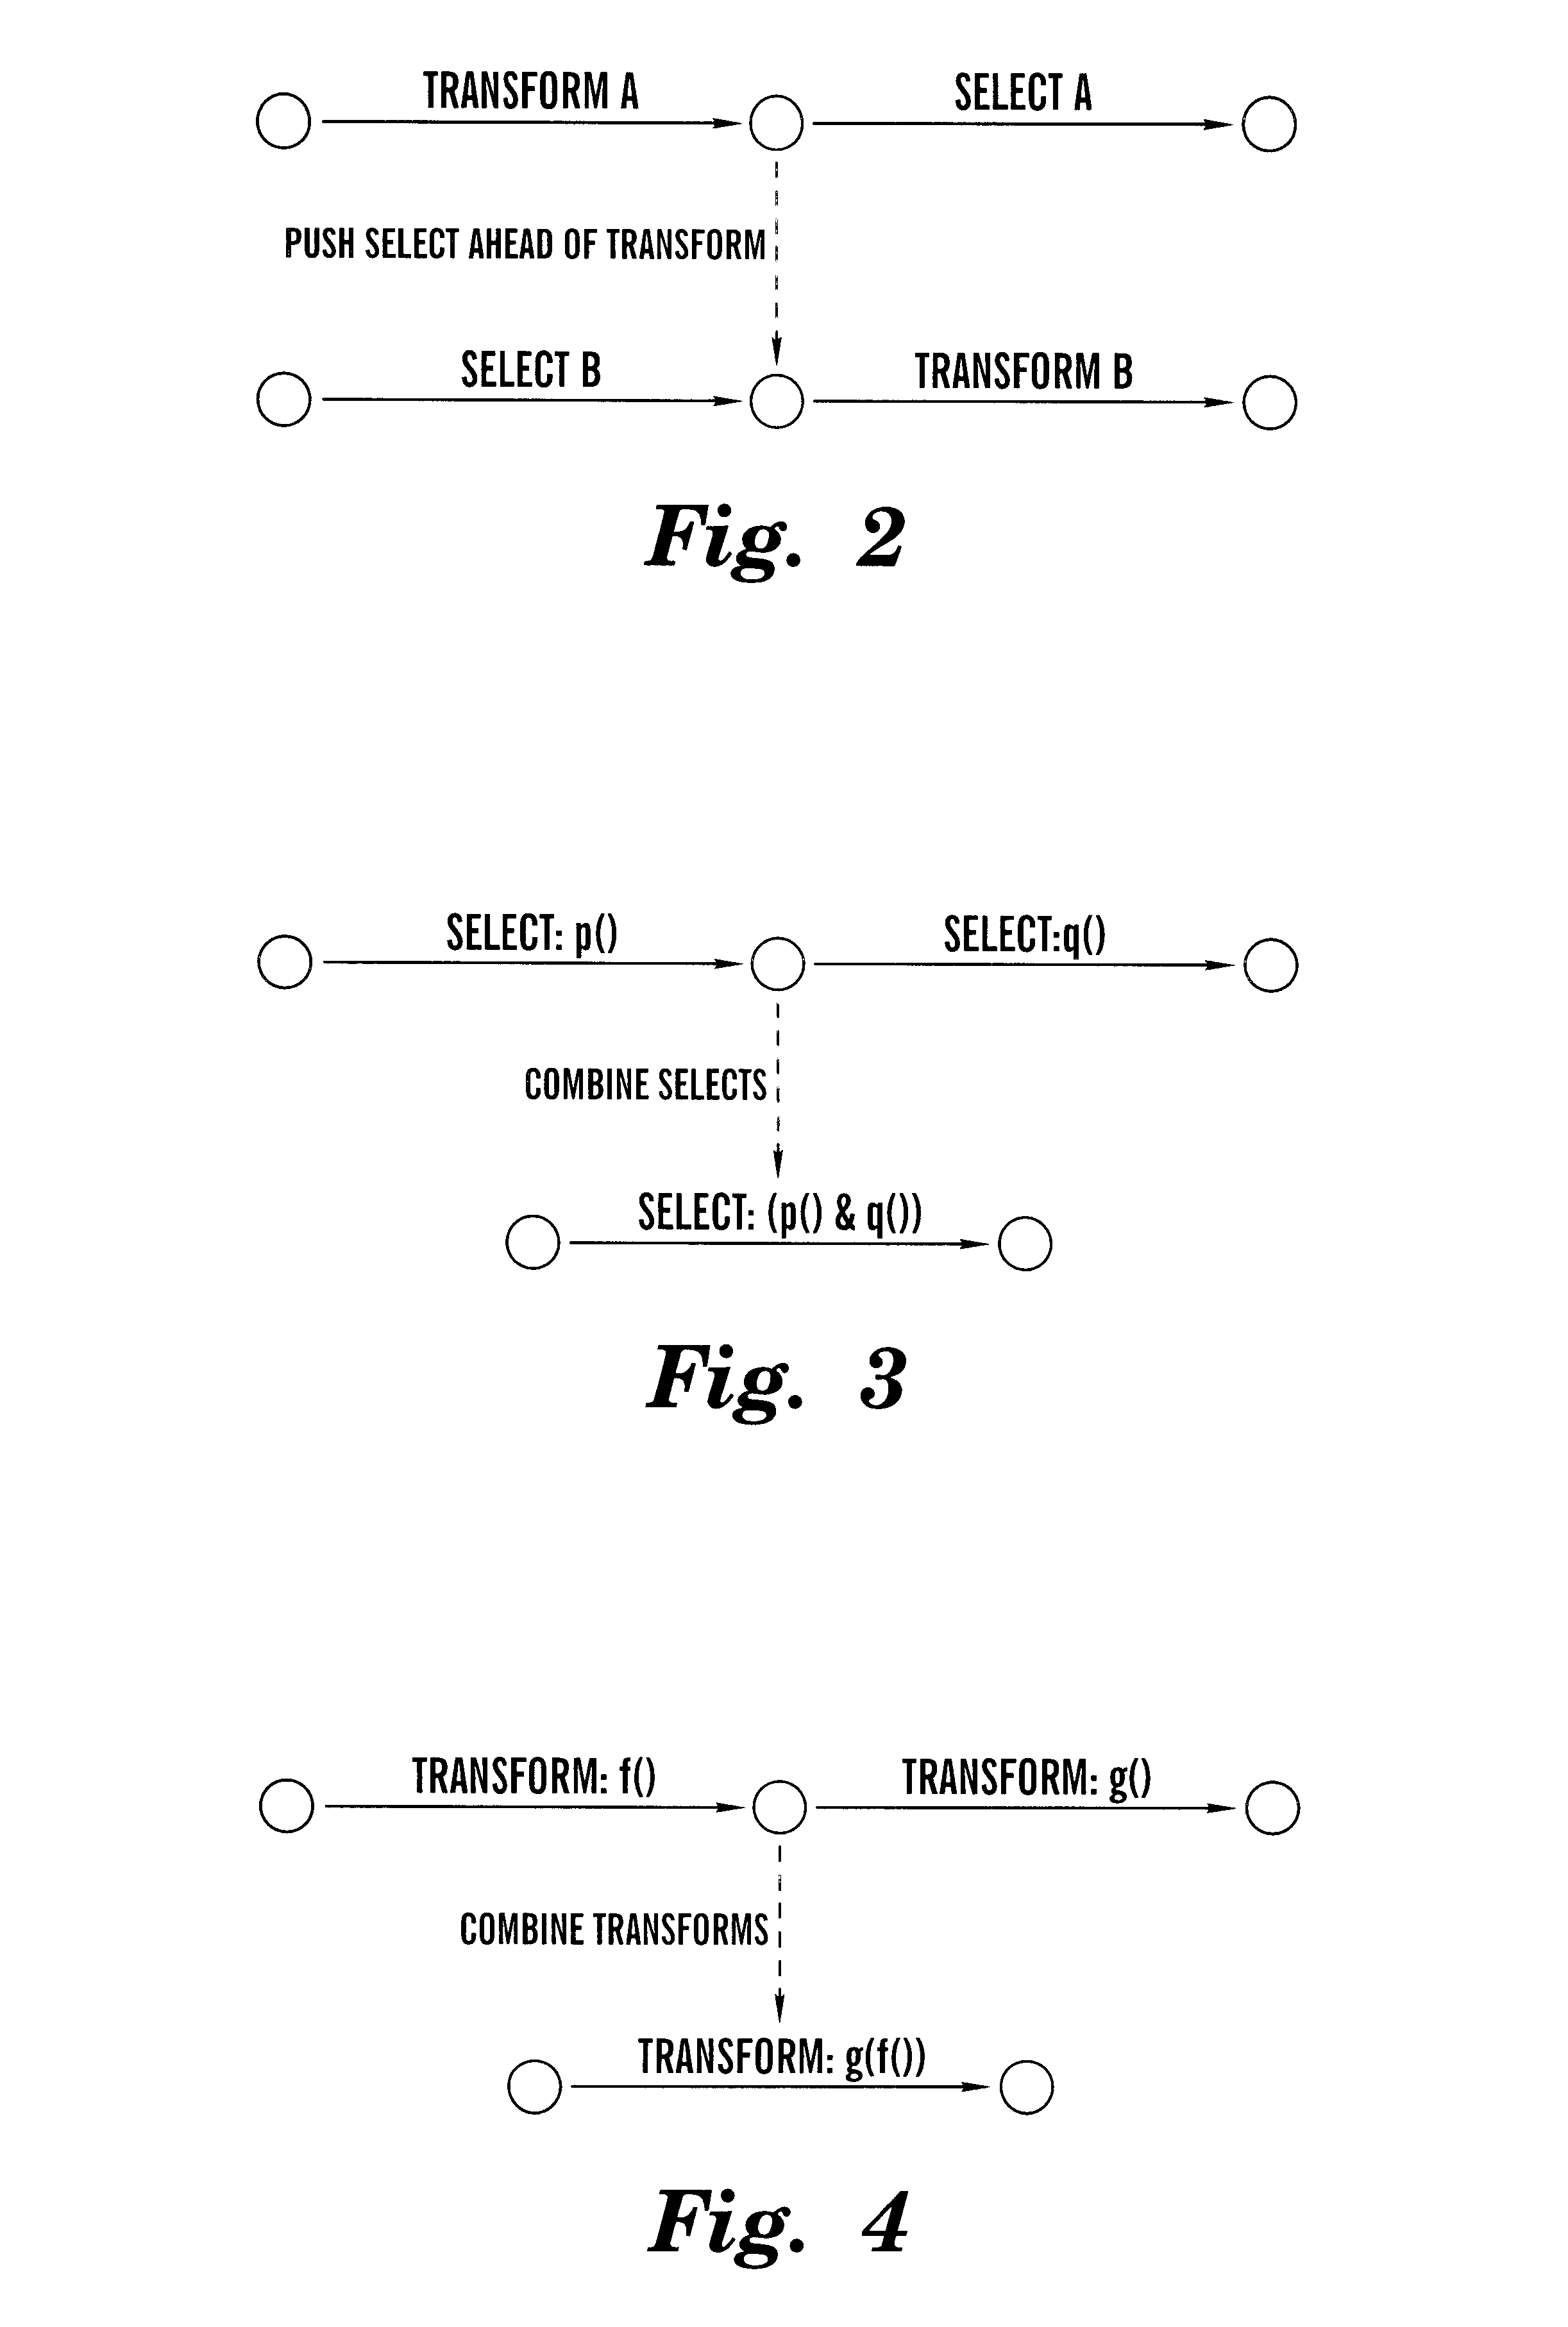 Reduction and optimization of operational expressions applied to information spaces between nodes in a publish/subscribe system